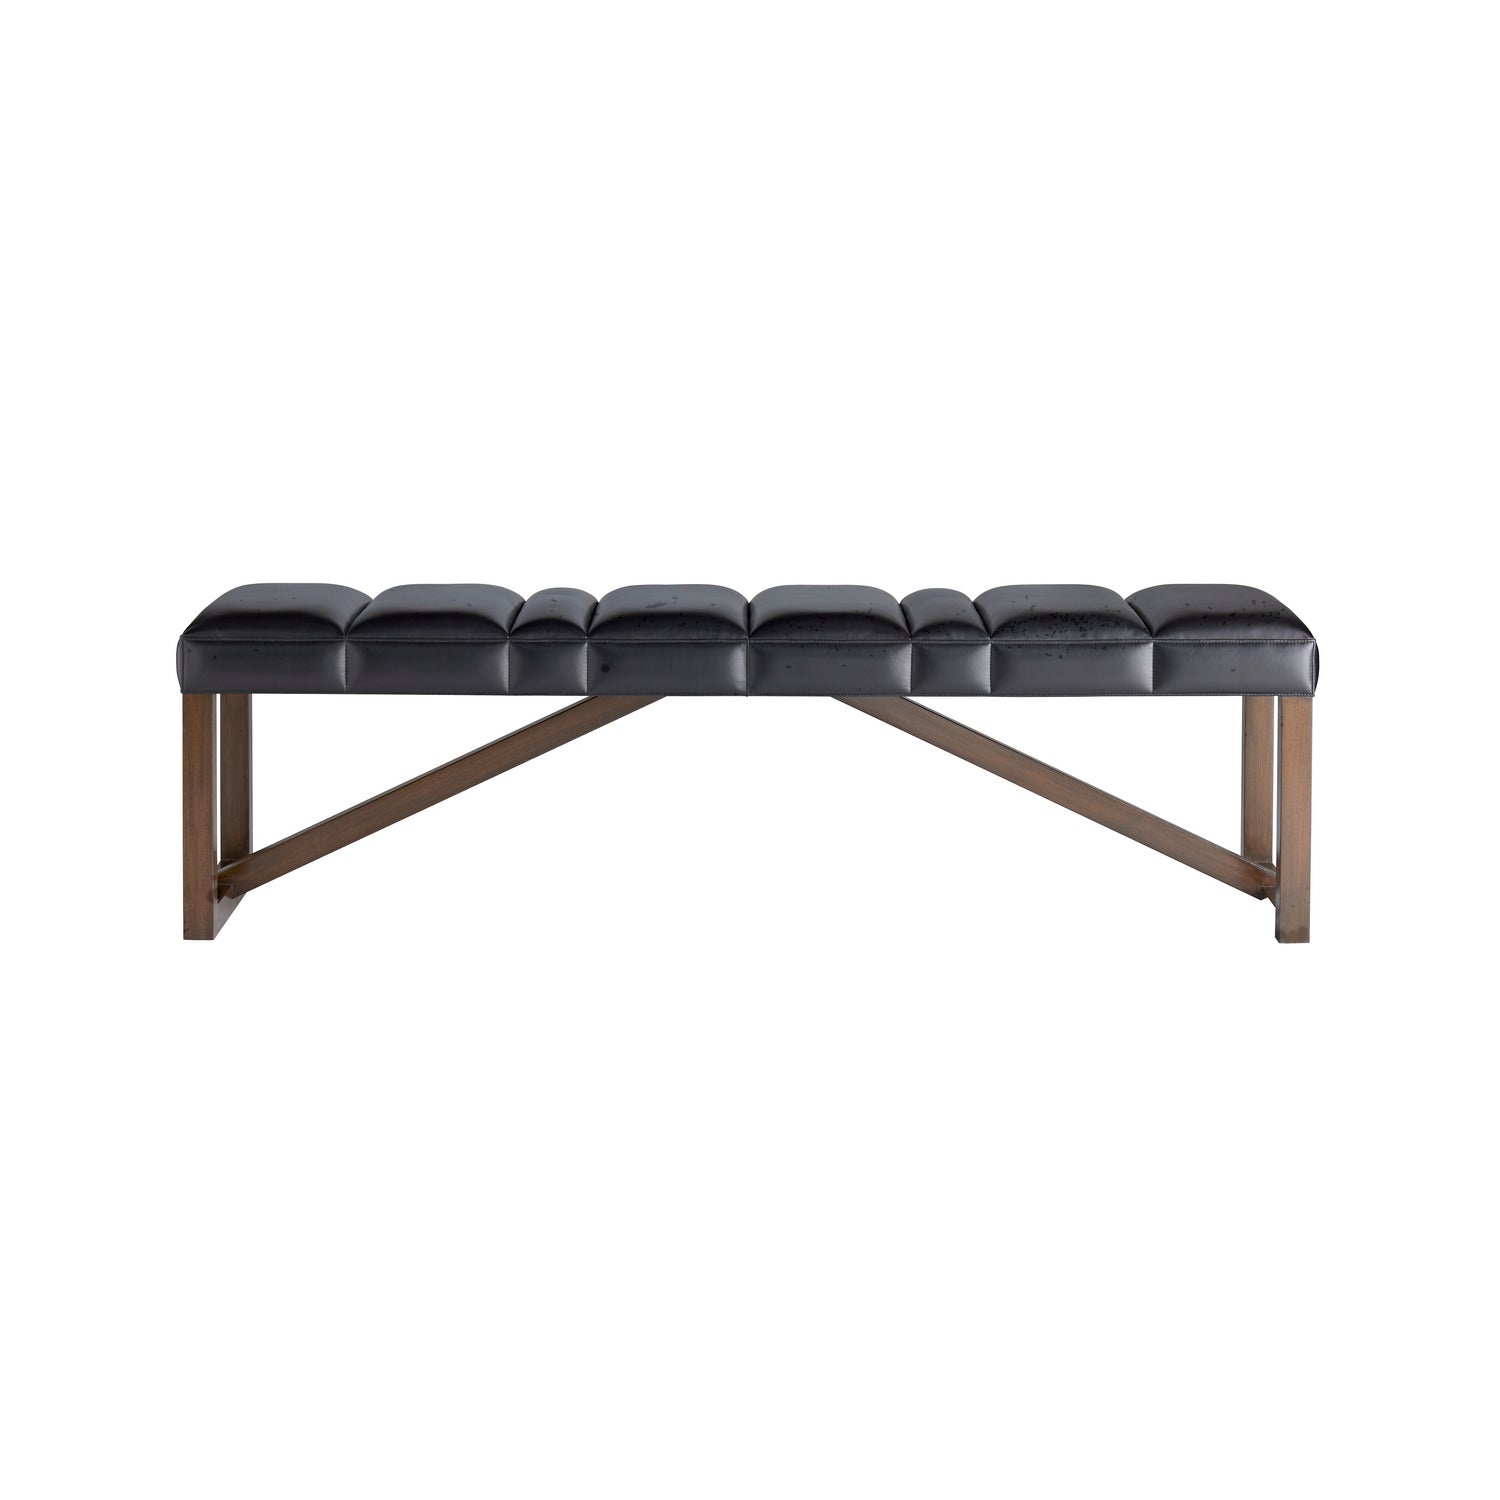 Bench from the Greenwald collection in Black finish